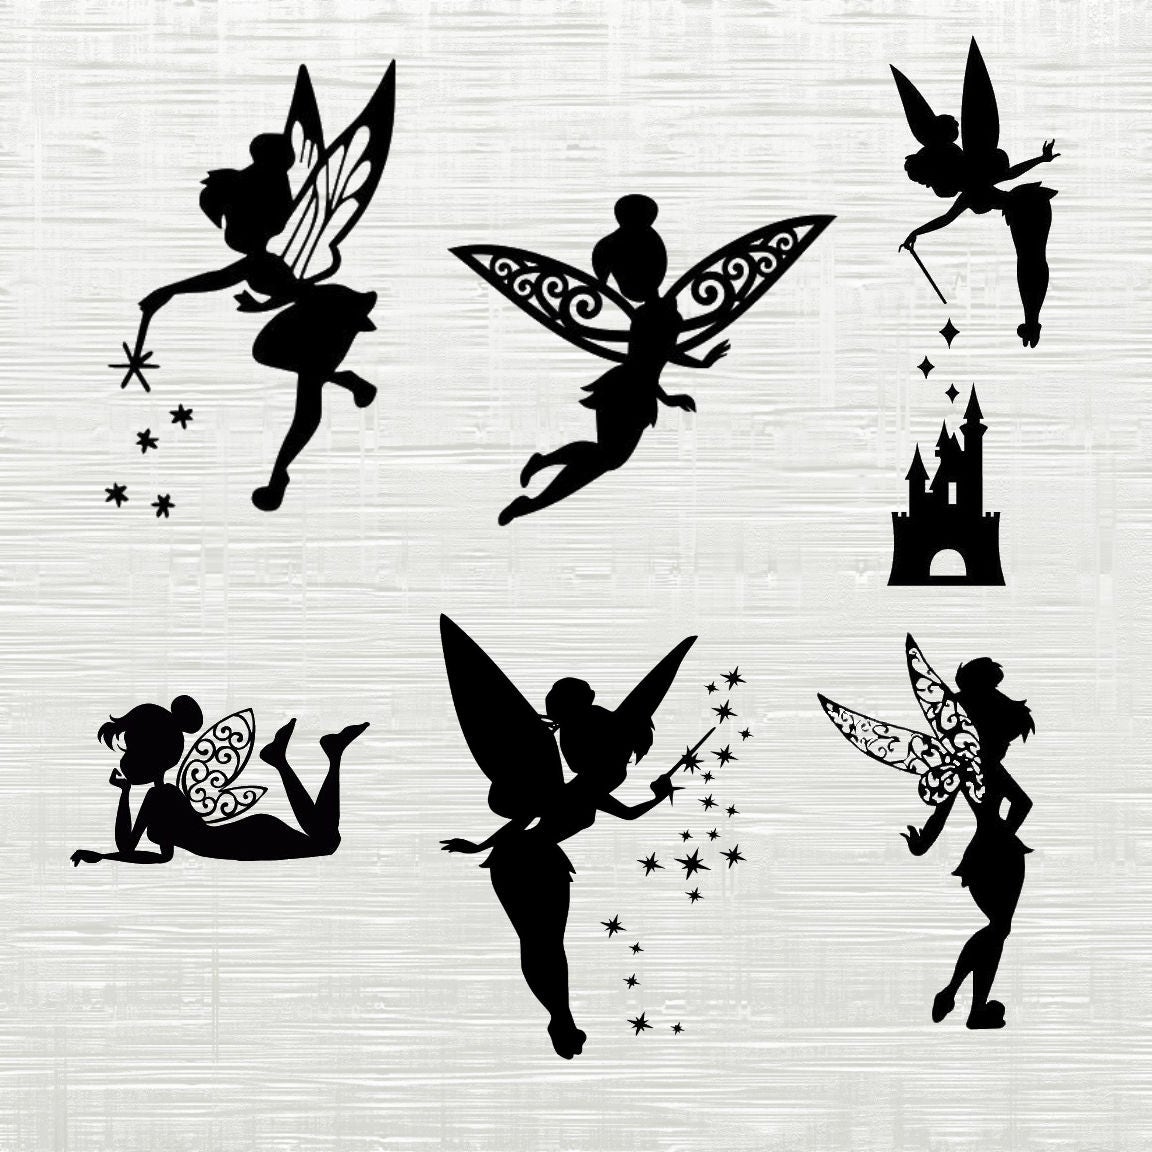 Tinker bell svg (page 1). Free for commercial use with attribution. 